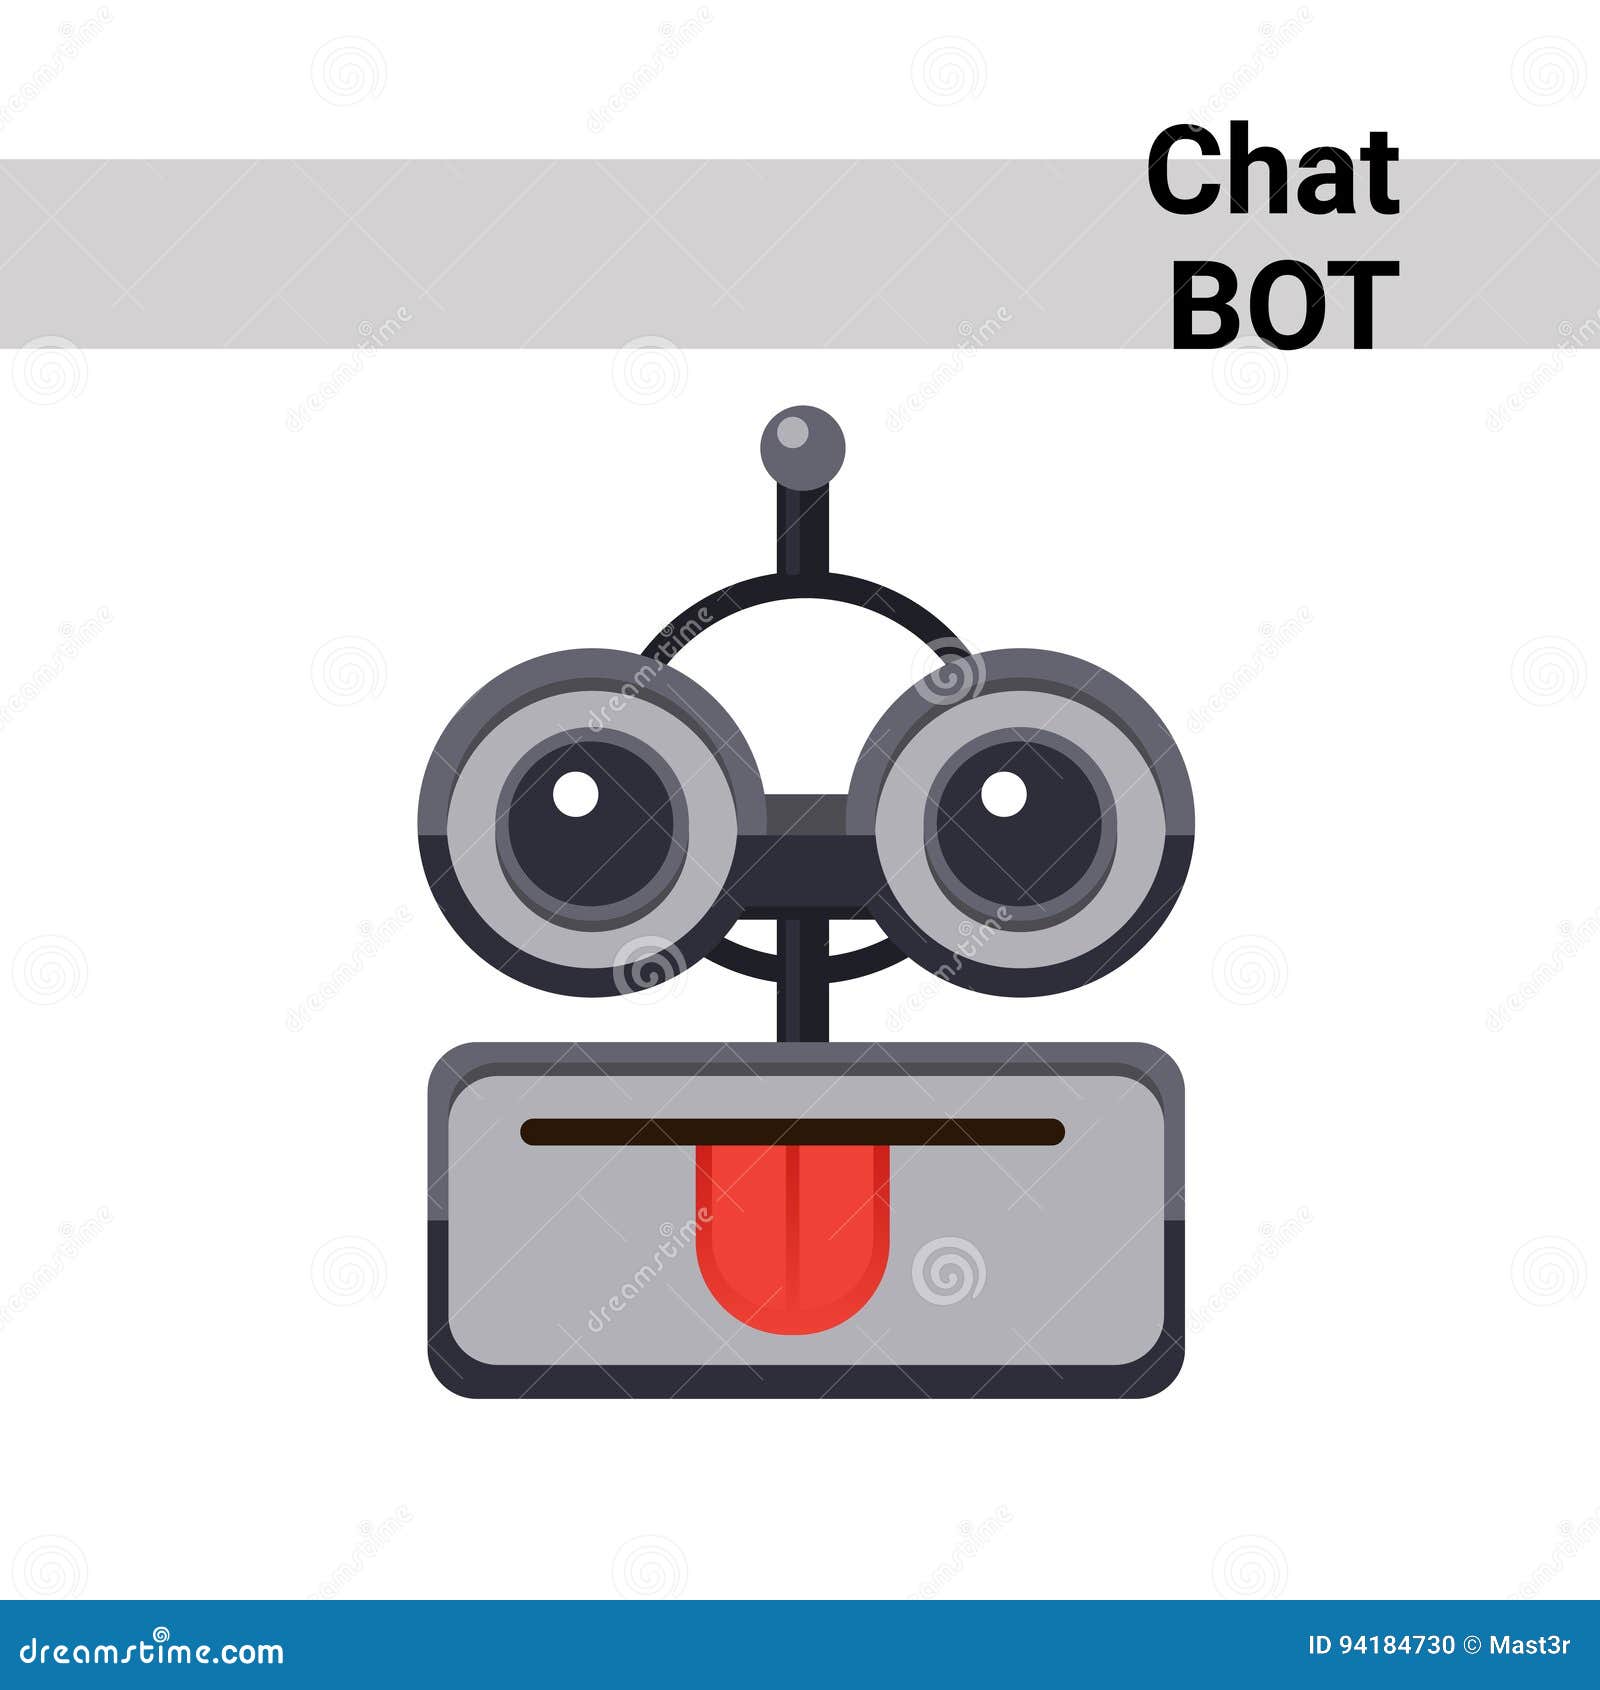 Cartoon Robot Face Smiling Cute Emotion Show Tongue Chat Bot Icon Stock  Vector - Illustration of funny, artificial: 94184730